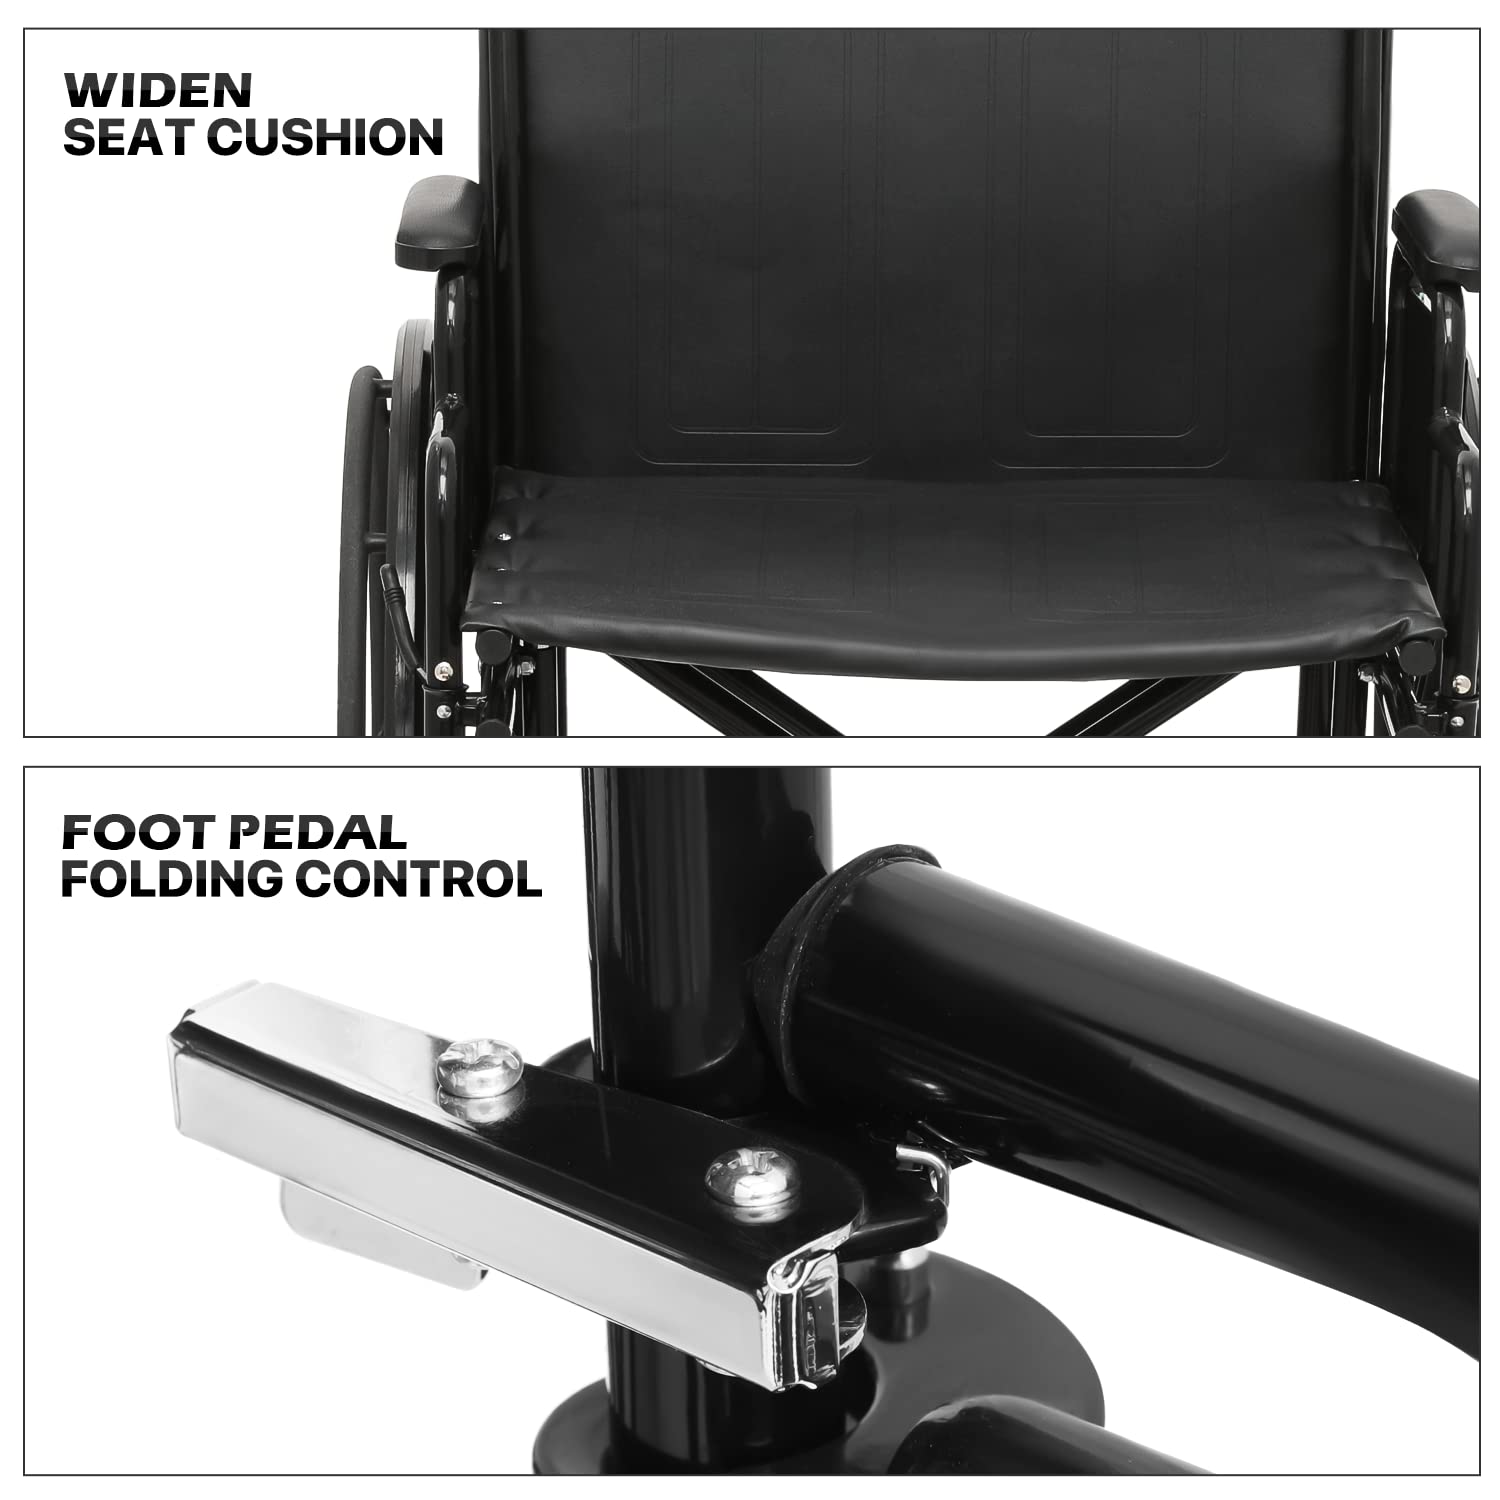 MoNiBloom Lightweight Foldable Wheelchair Folding Self Propelled Transport Wheel Chair with Swing-Away Adjustable Footrest, 24